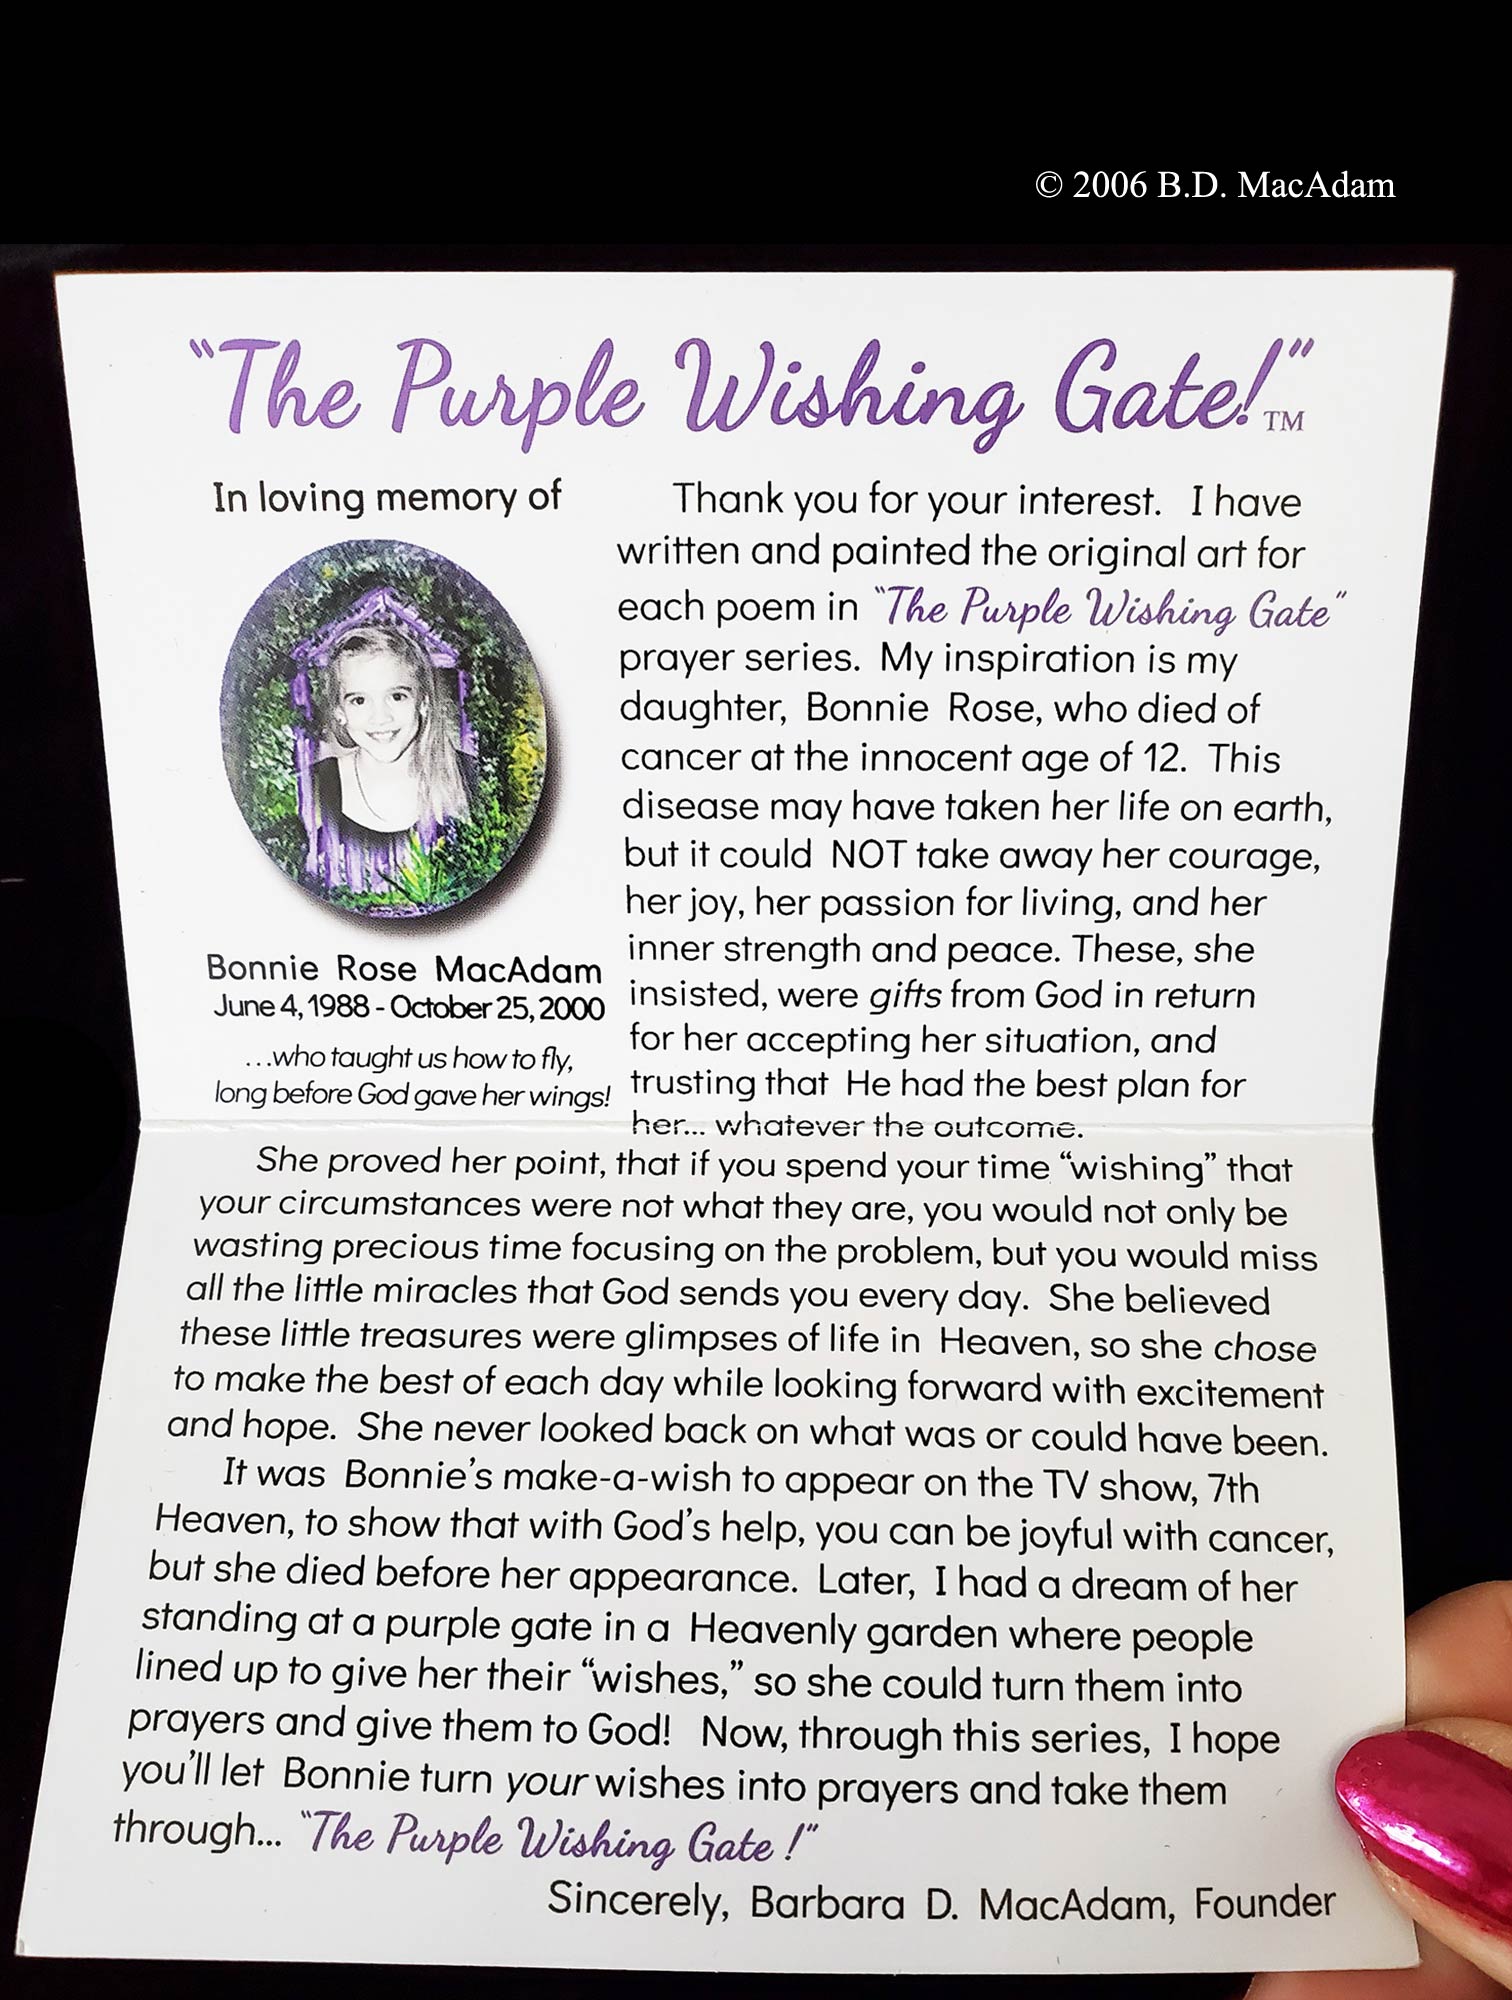 A Friend's Blessing - Pocket Blessing | PurpleWishingGate.com